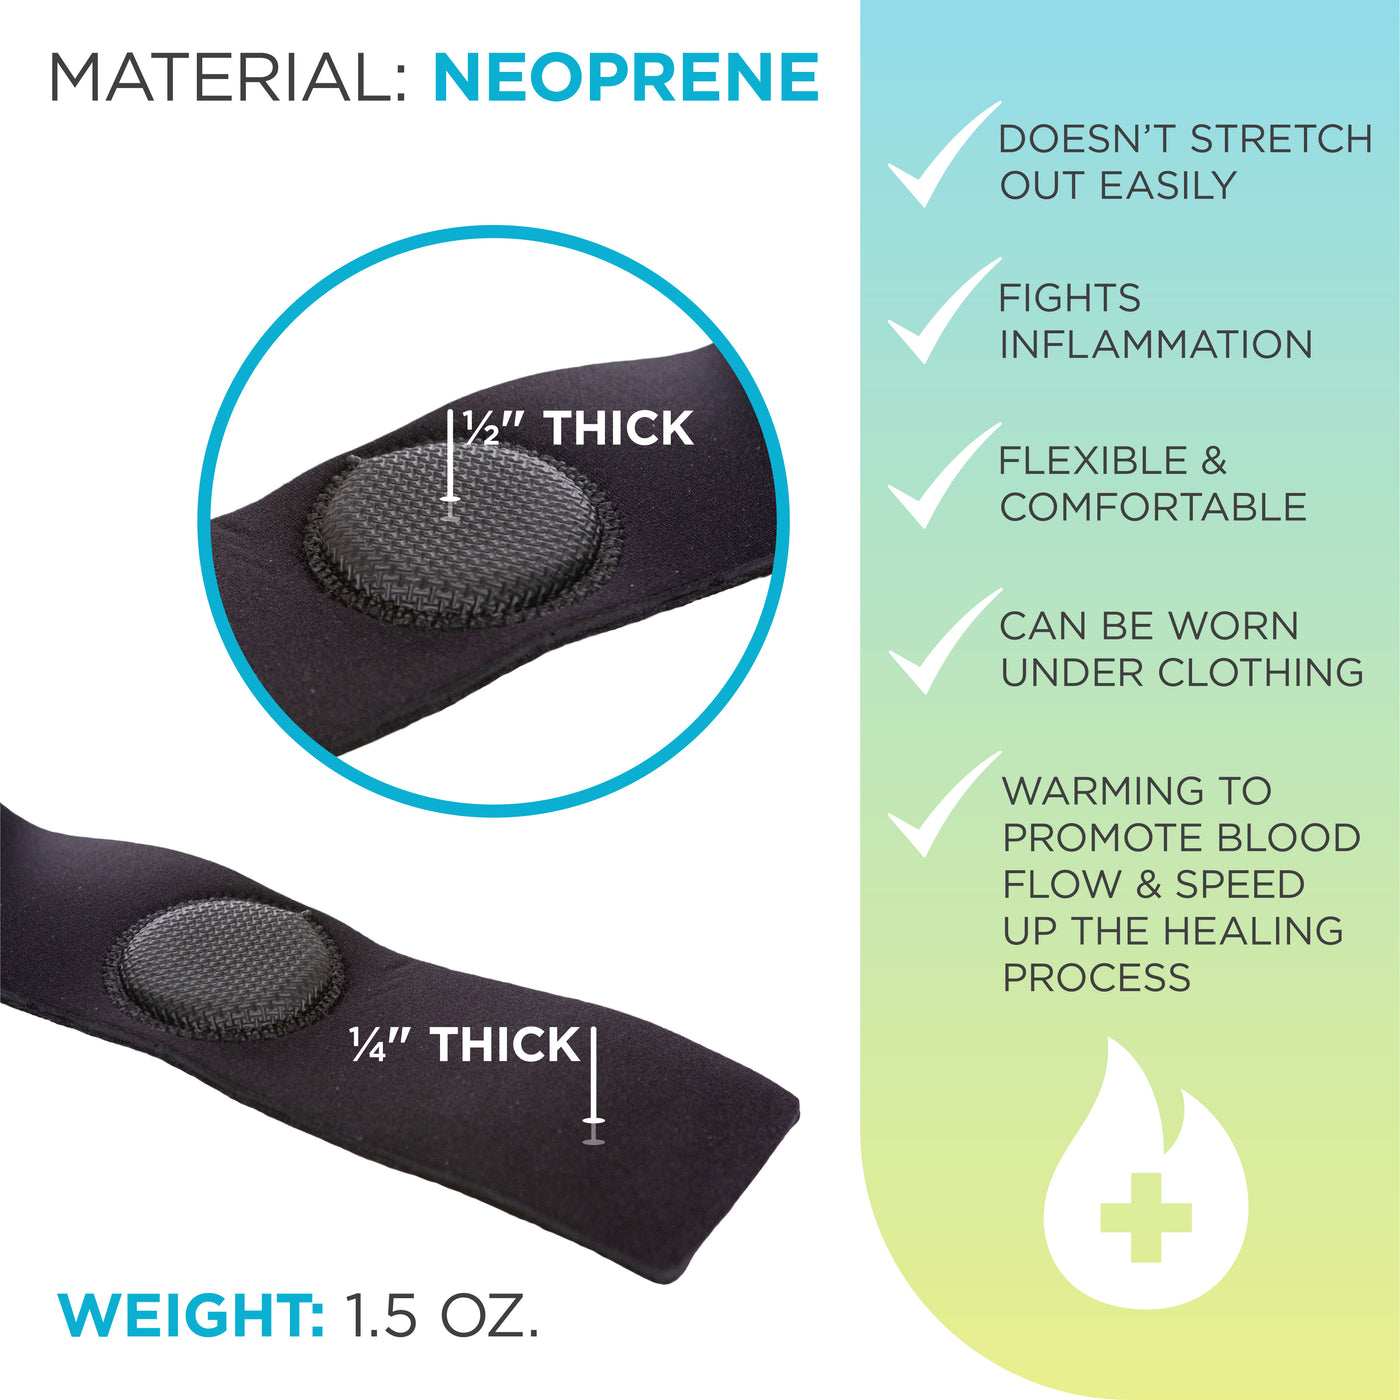 The black neoprene tennis elbow strap is made with high-quality fabric that has a one half inch compression pad